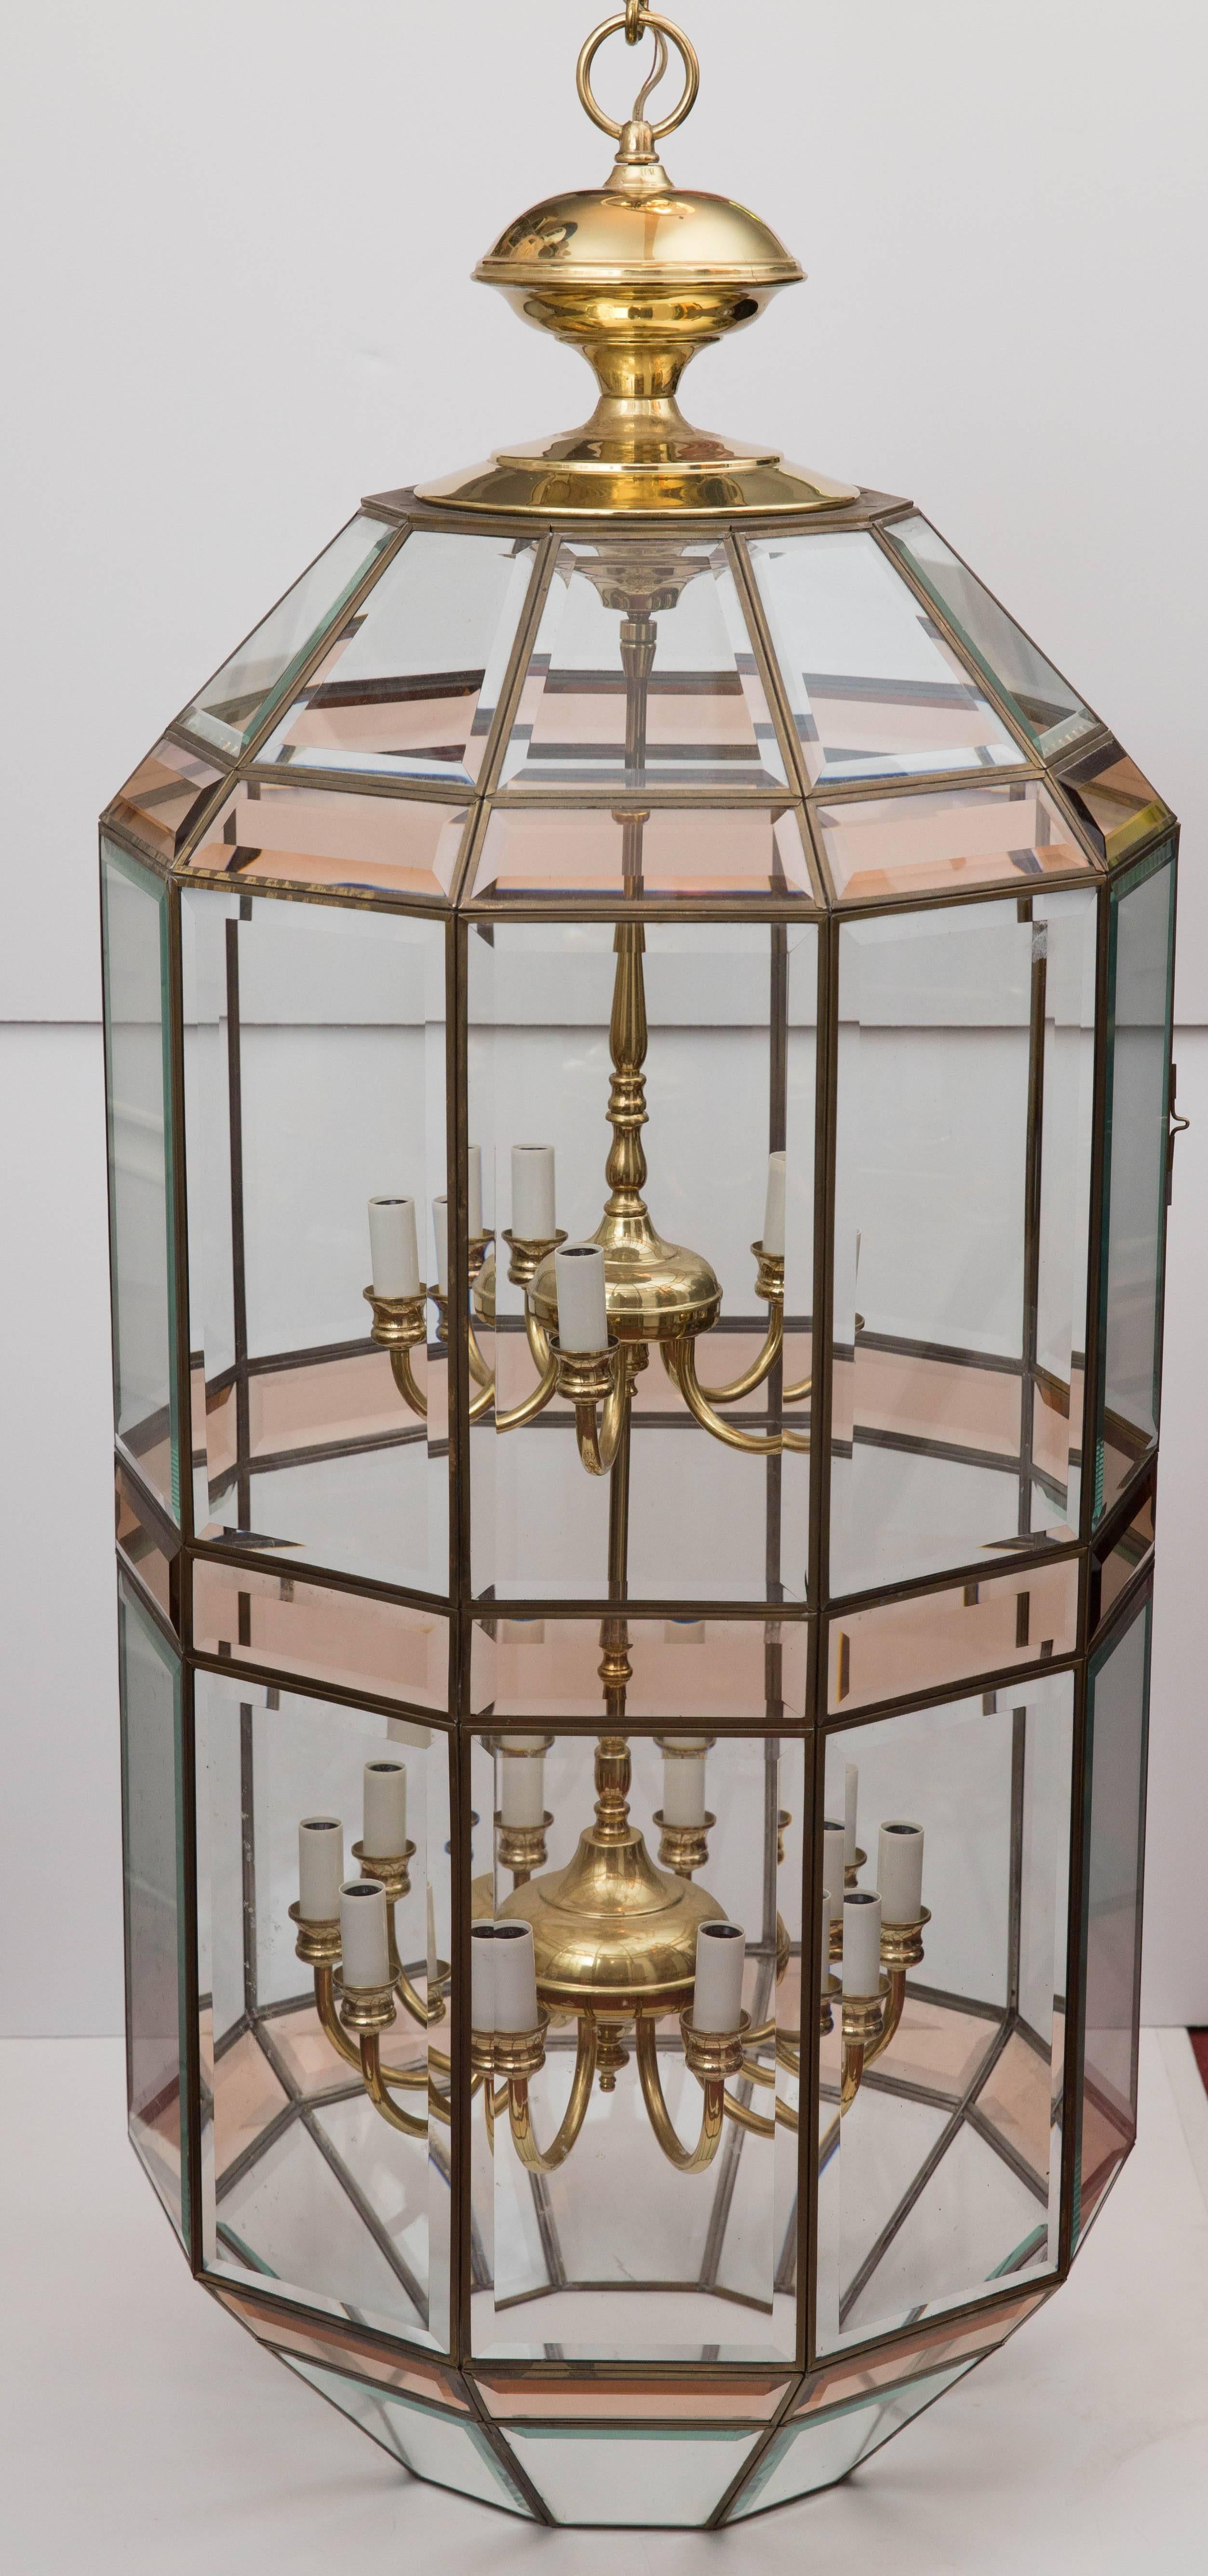 A pair of very large double-light cluster hanging lanterns. Produced by Fredrick Ramond Lighting in the 1980s. Panels of both clear and colored beveled glass surround 15 candelabra bulb sockets, five above and ten below.